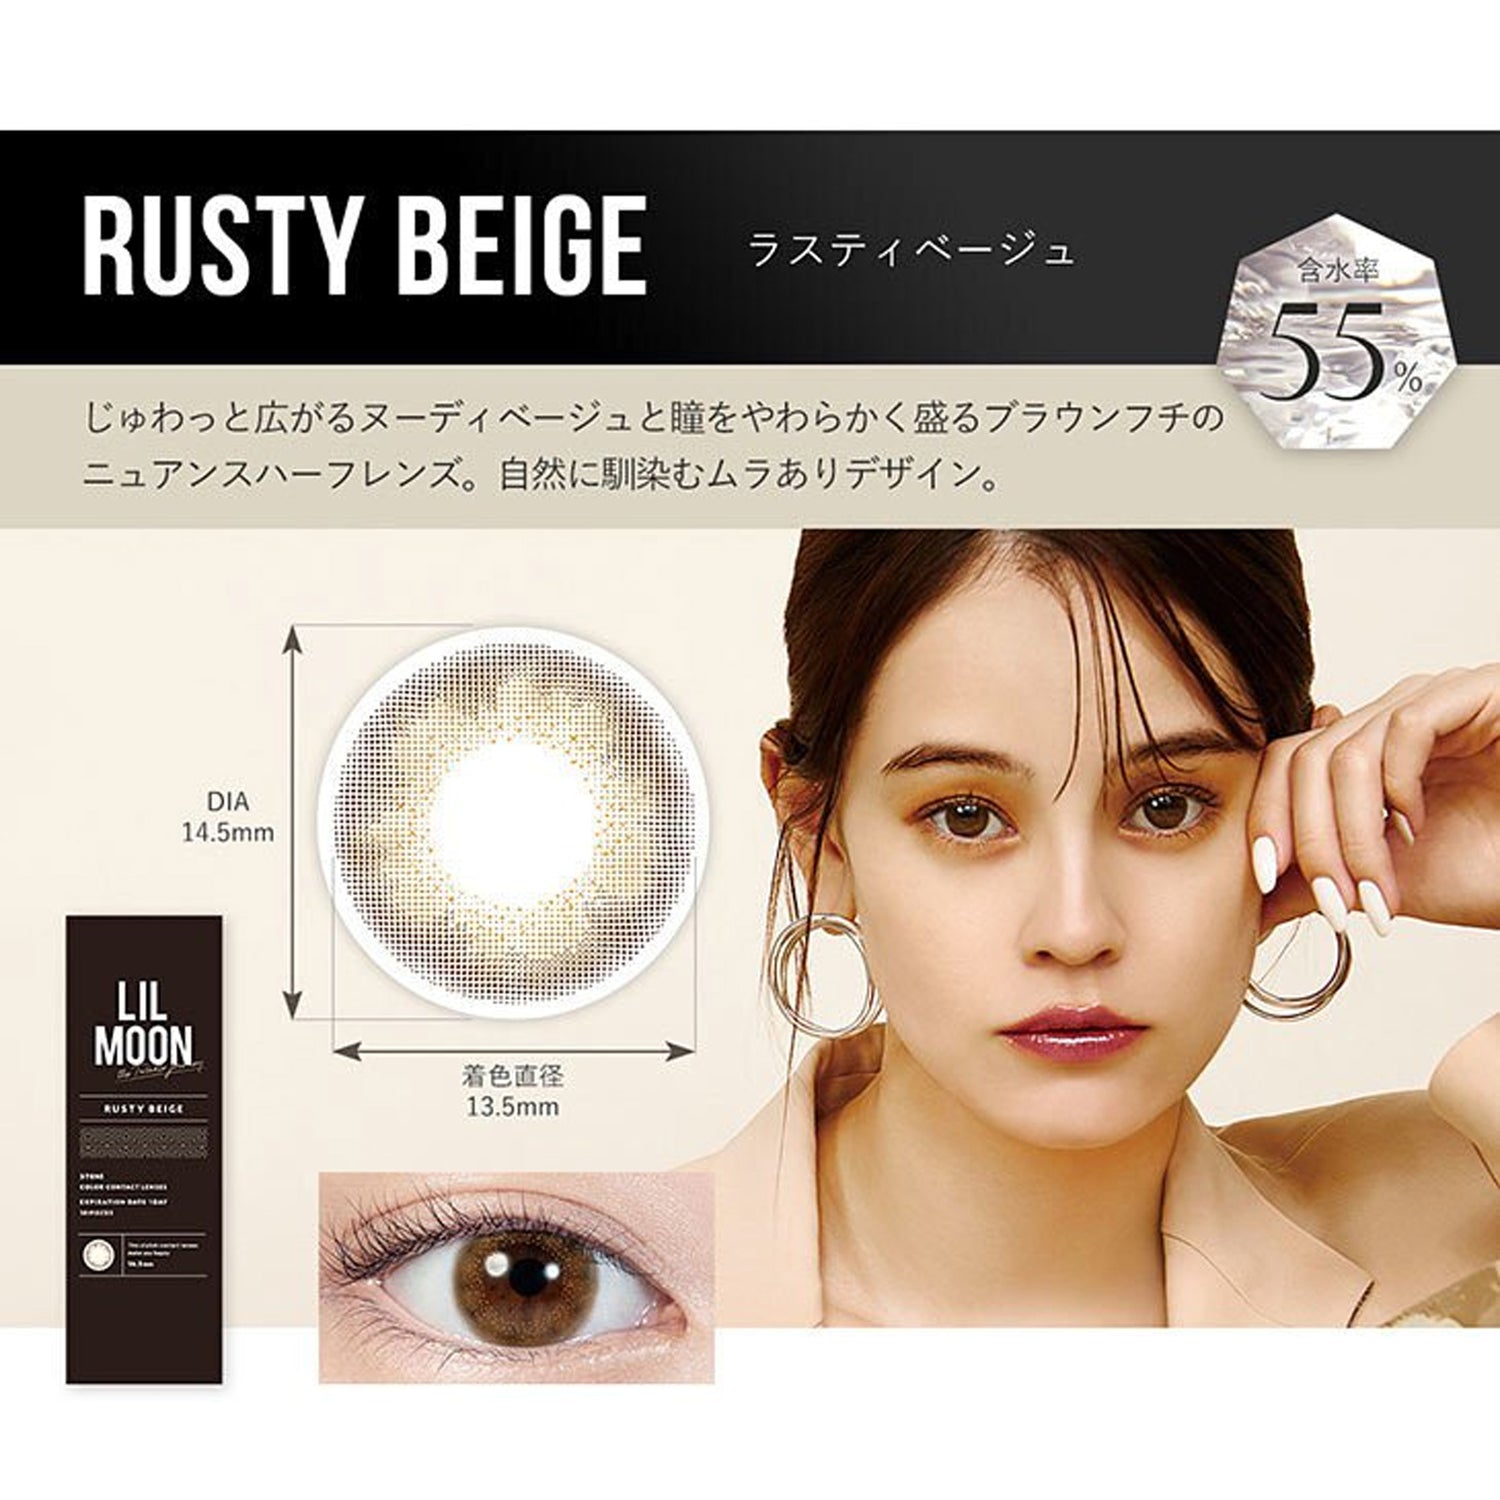 LIL MOON 1Day Contact Lenses-Rusty Beige 10pcs